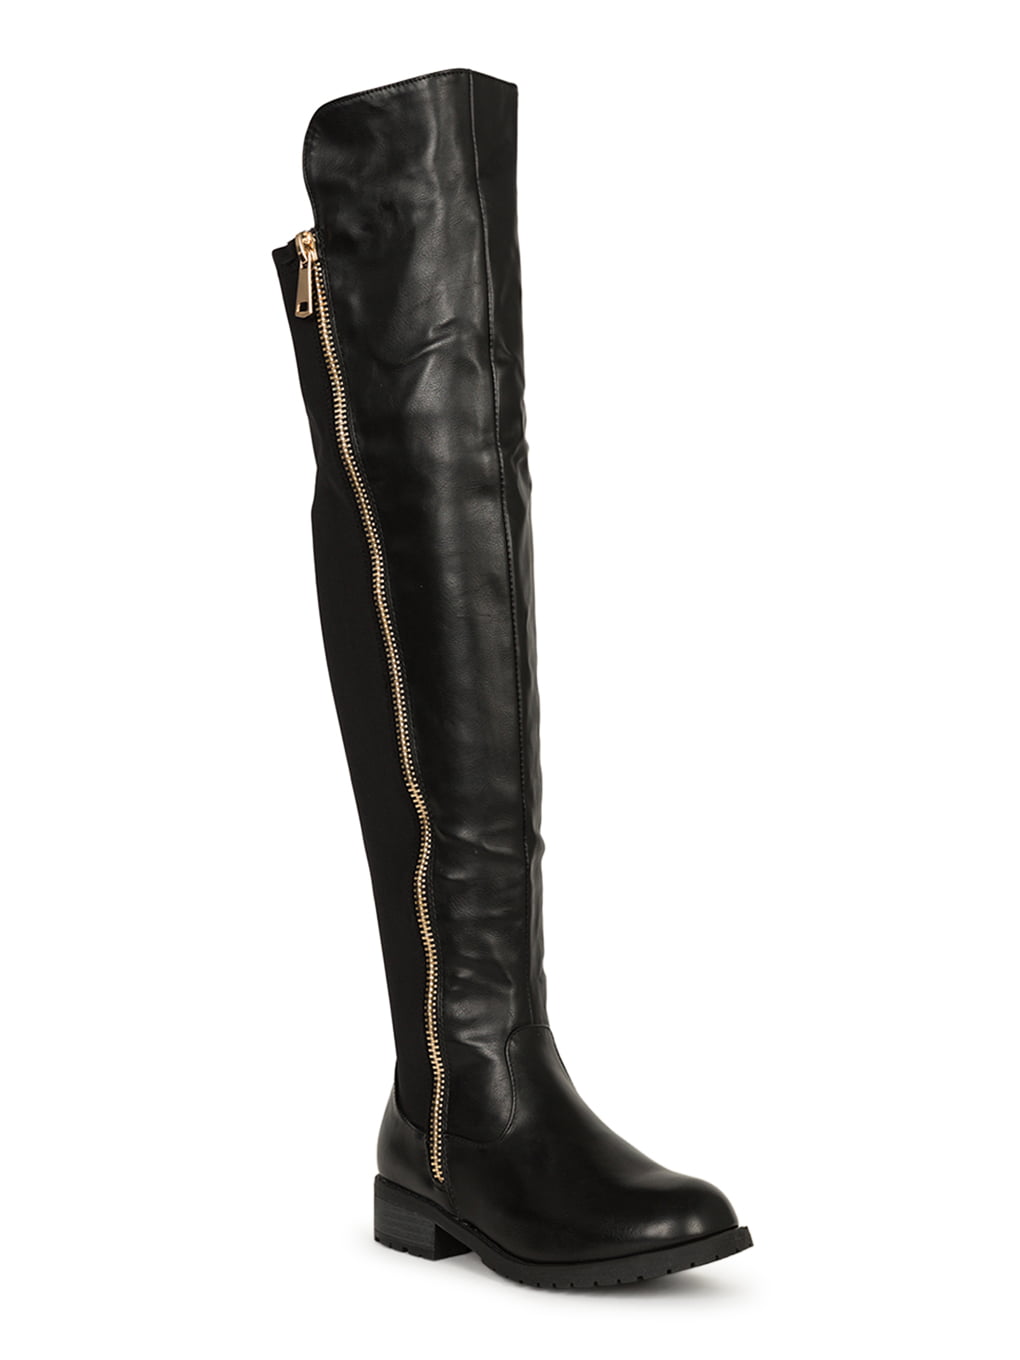 Details about   Womens New Fashion PU Leather Zipper Block Heel Knee High Riding Boots Shoes AQC 